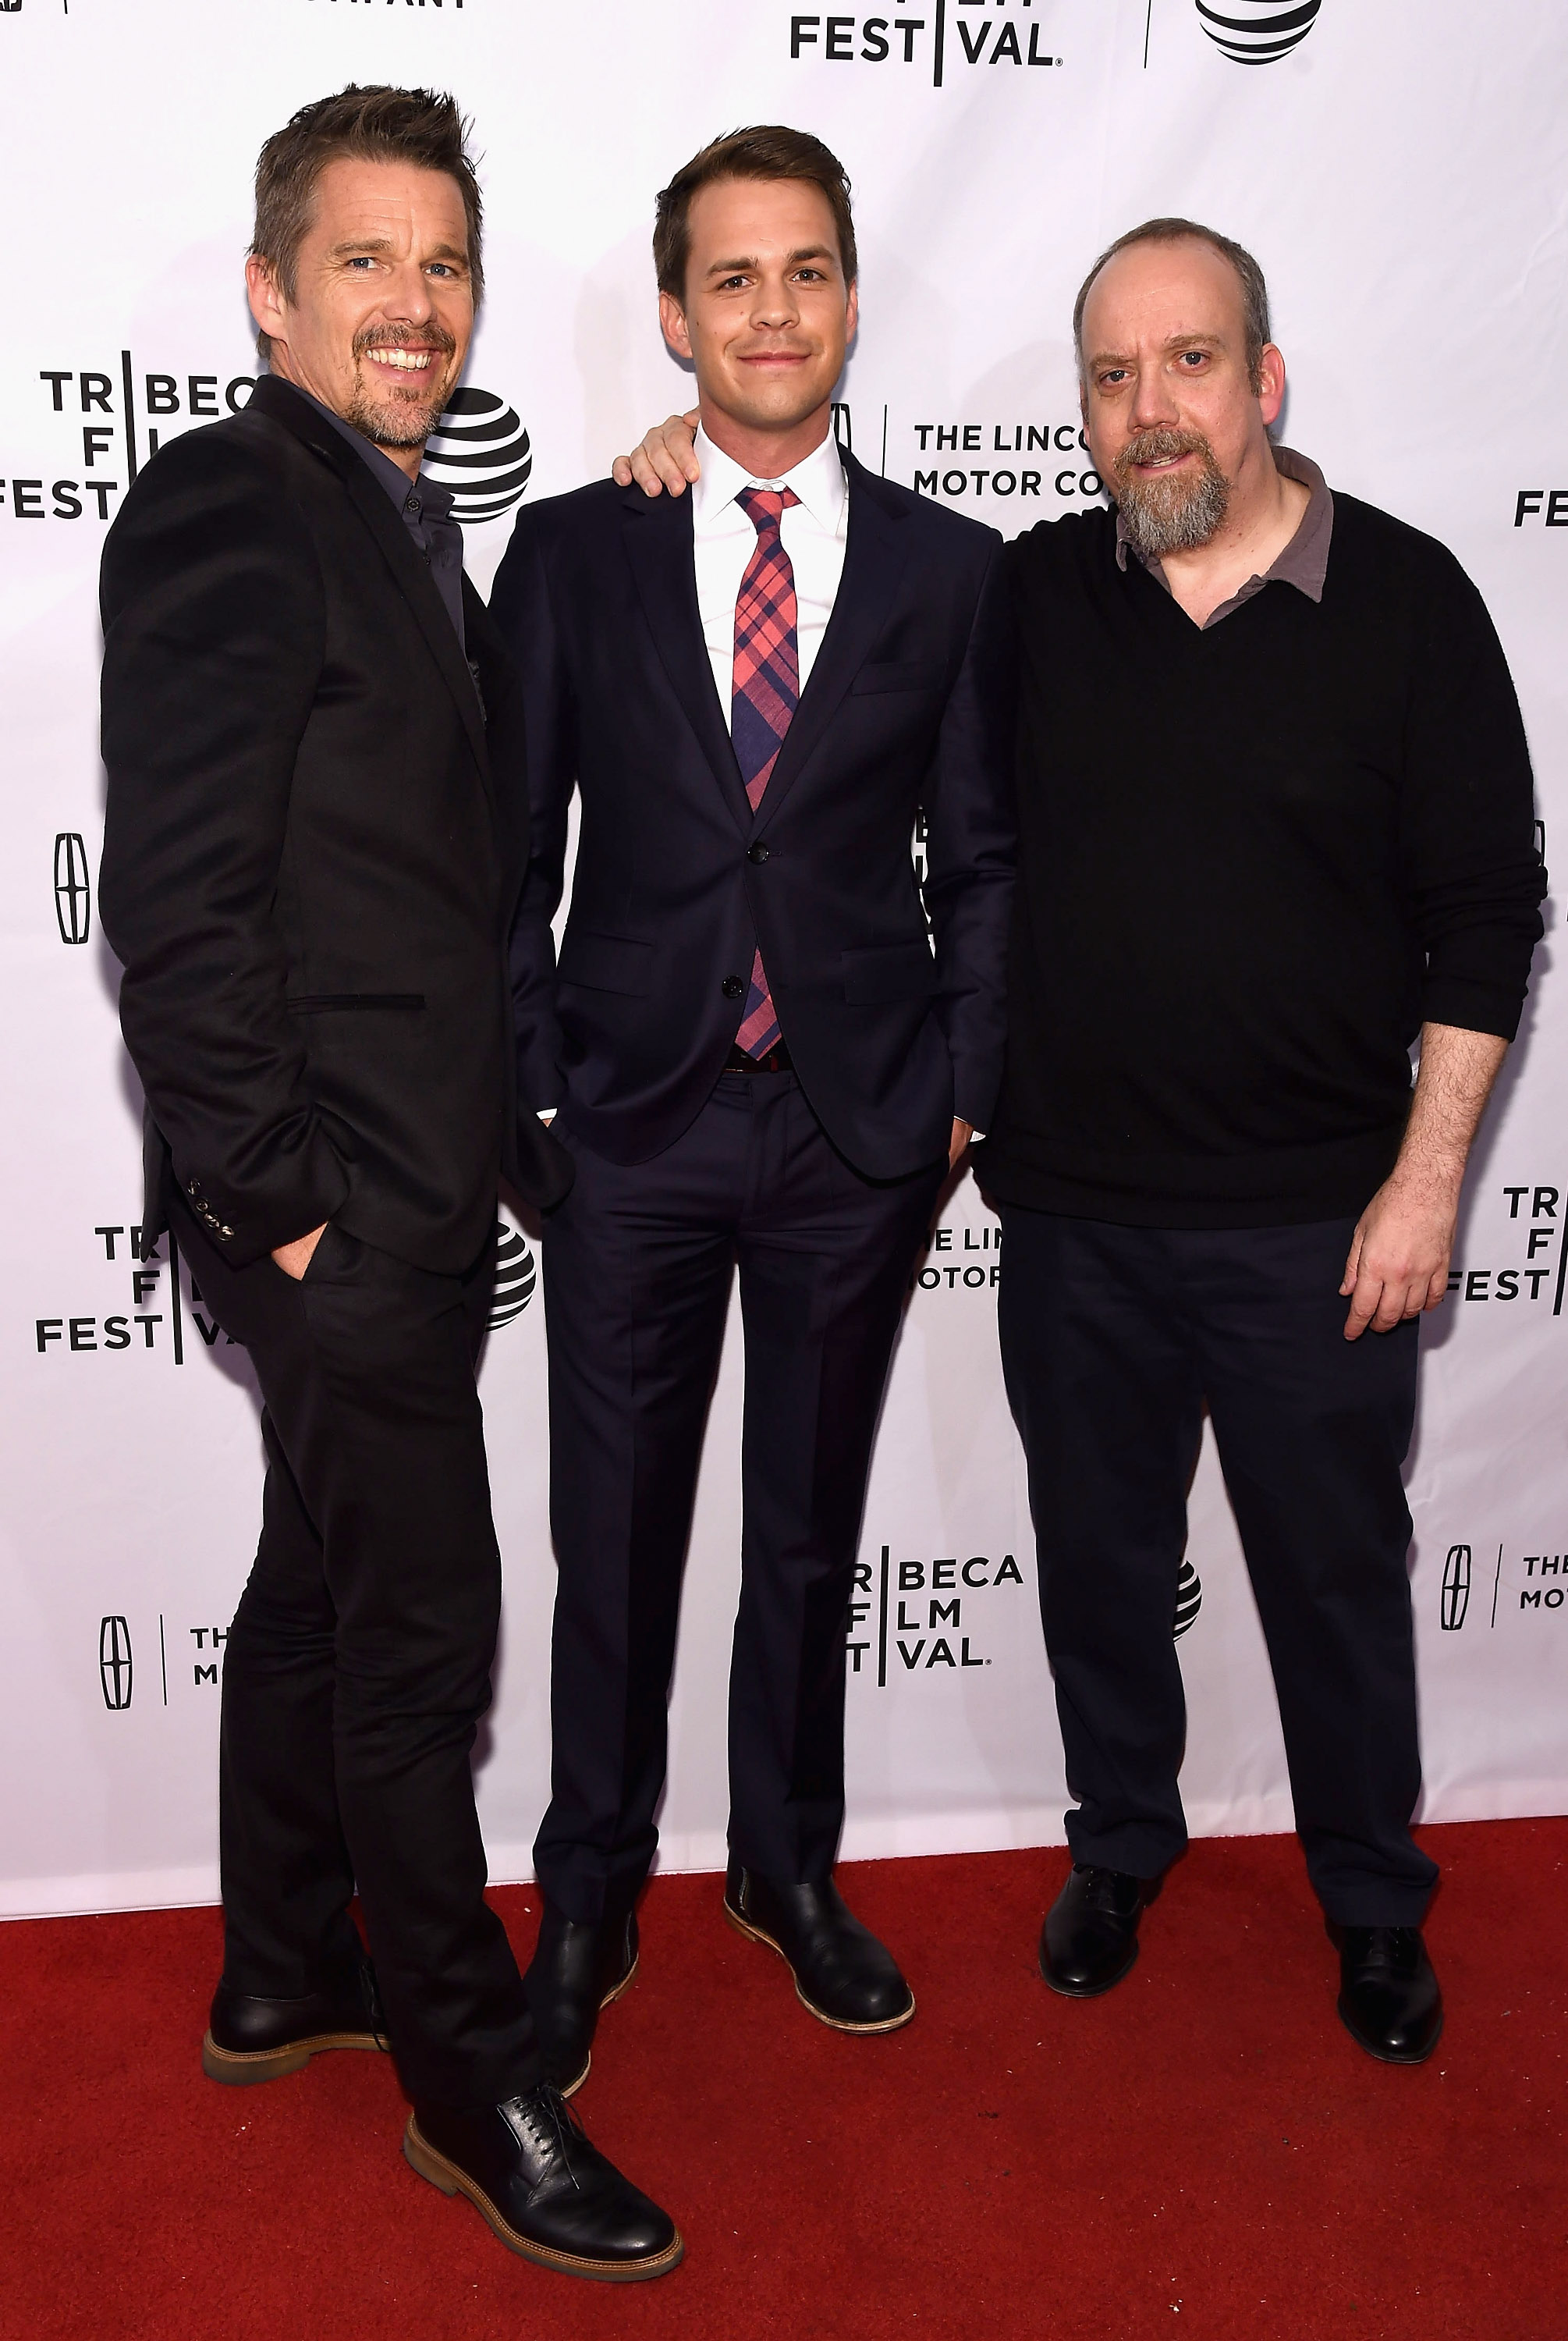 Ethan Hawke, Johnny Simmons and Paul Giamatti during the 2016 Tribeca Film Festival on April 17, 2016 in New York City. (Gary Gershoff—WireImage/Getty Images)